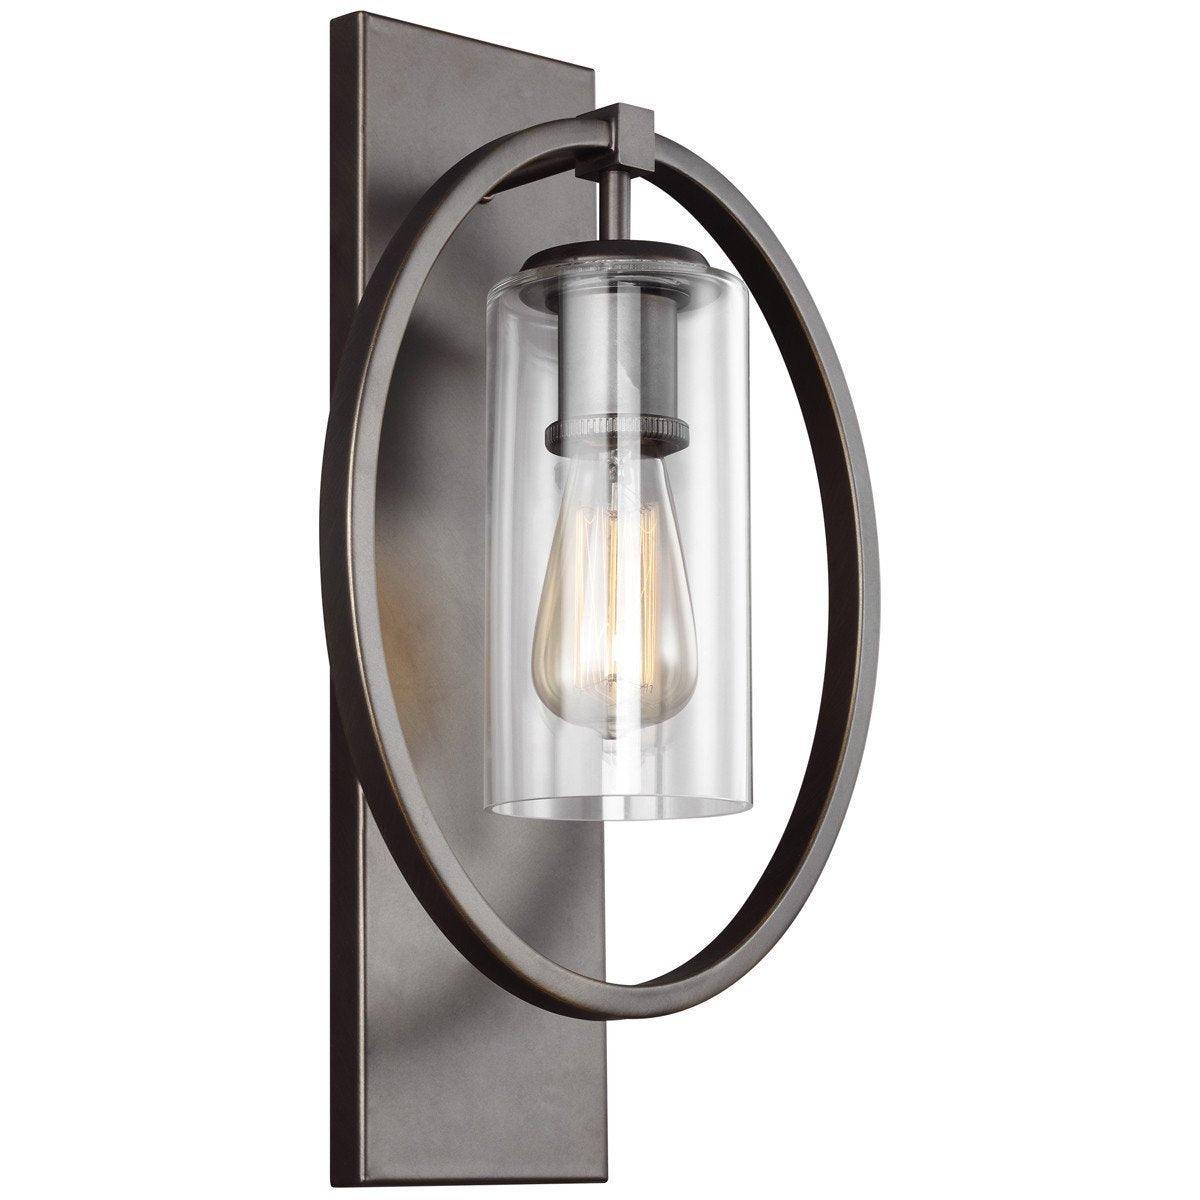 Feiss Marlena 1 Light Wall Sconce